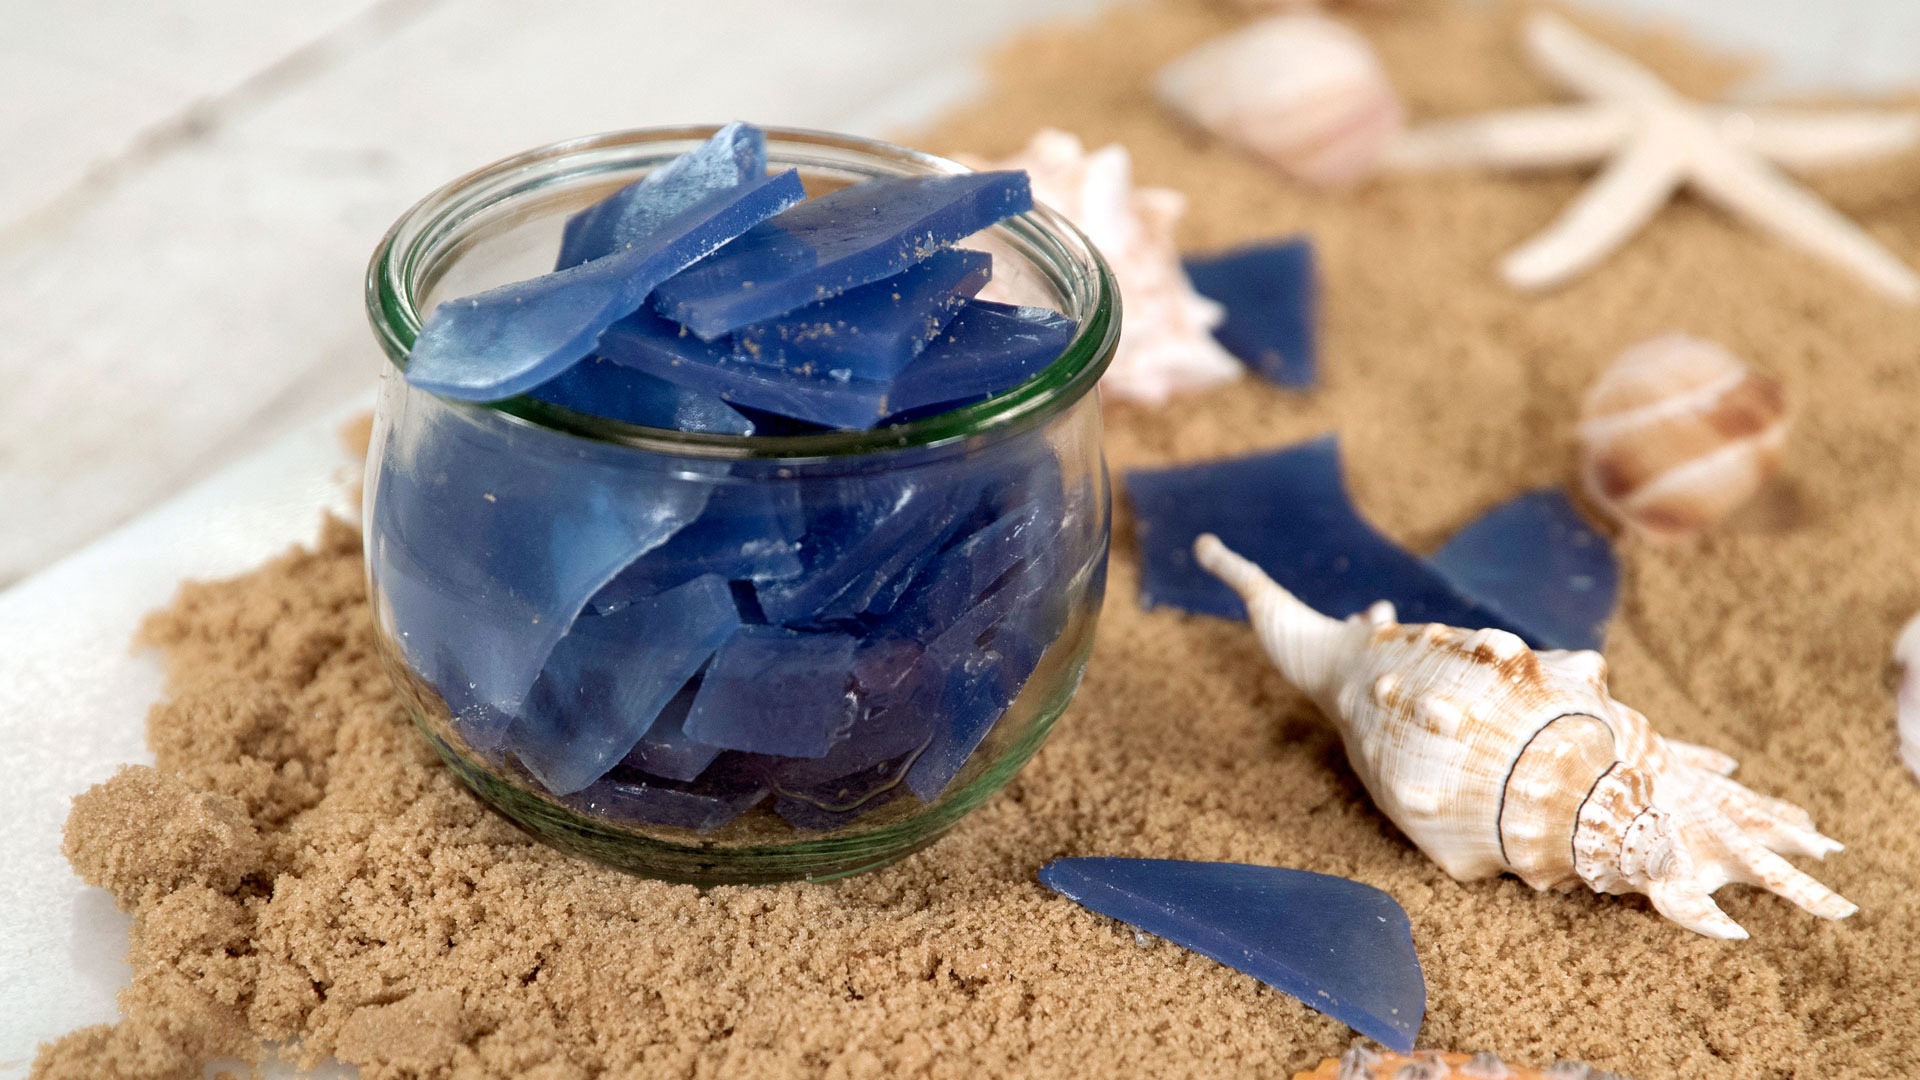 Edible Sea Glass Candy Looks Just Like It Washed up on the Beach